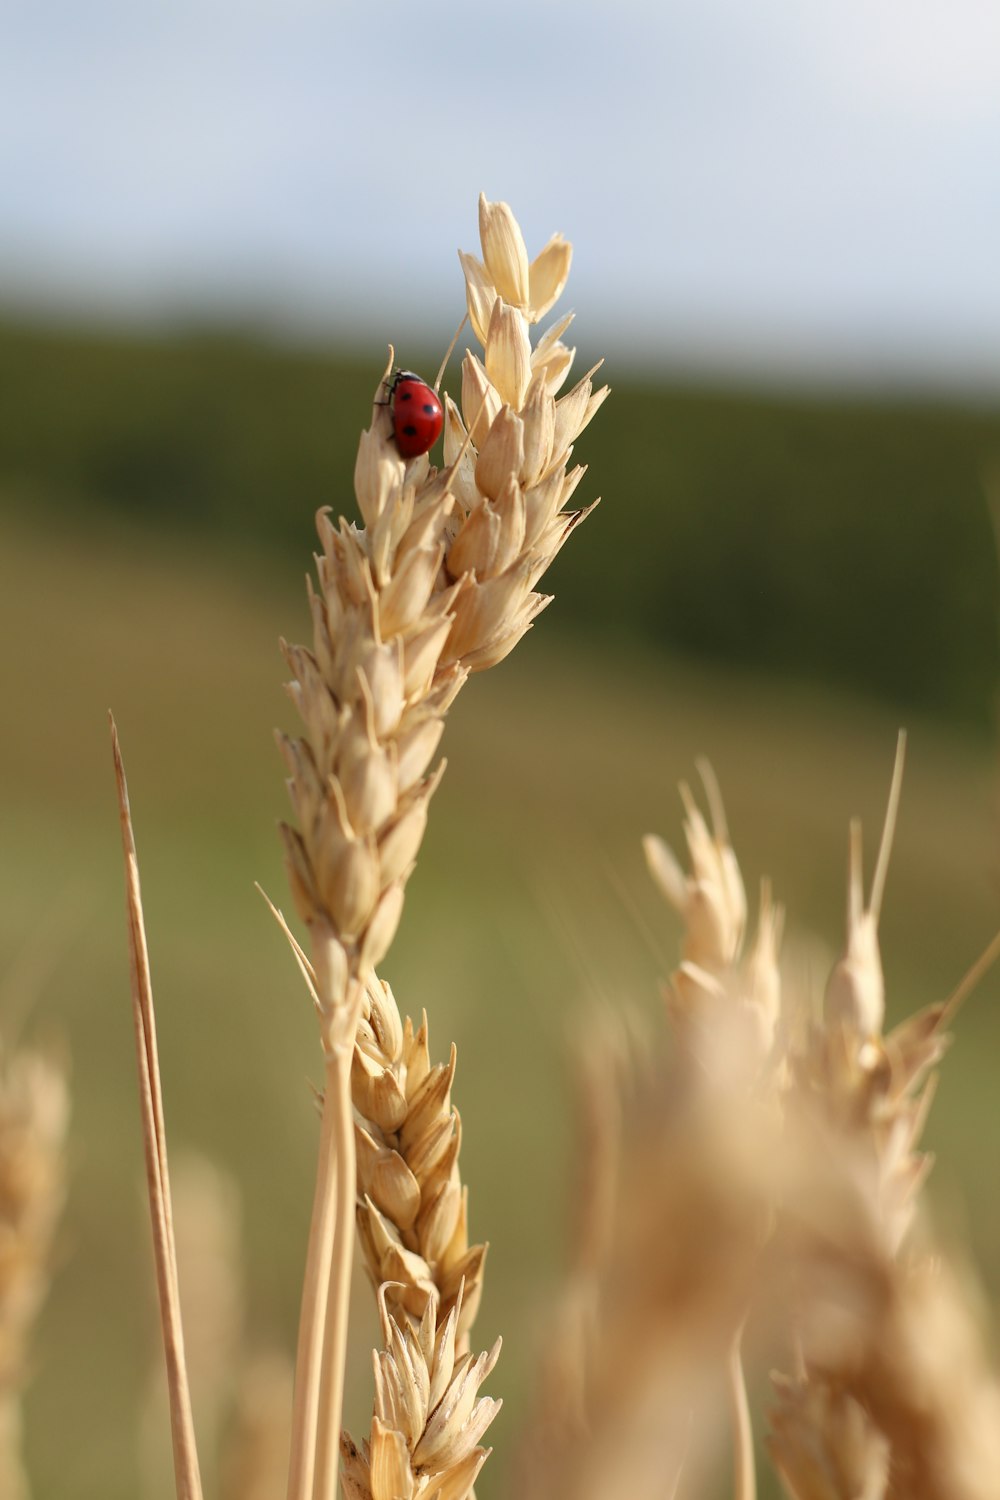 a ladybug sitting on top of a stalk of wheat